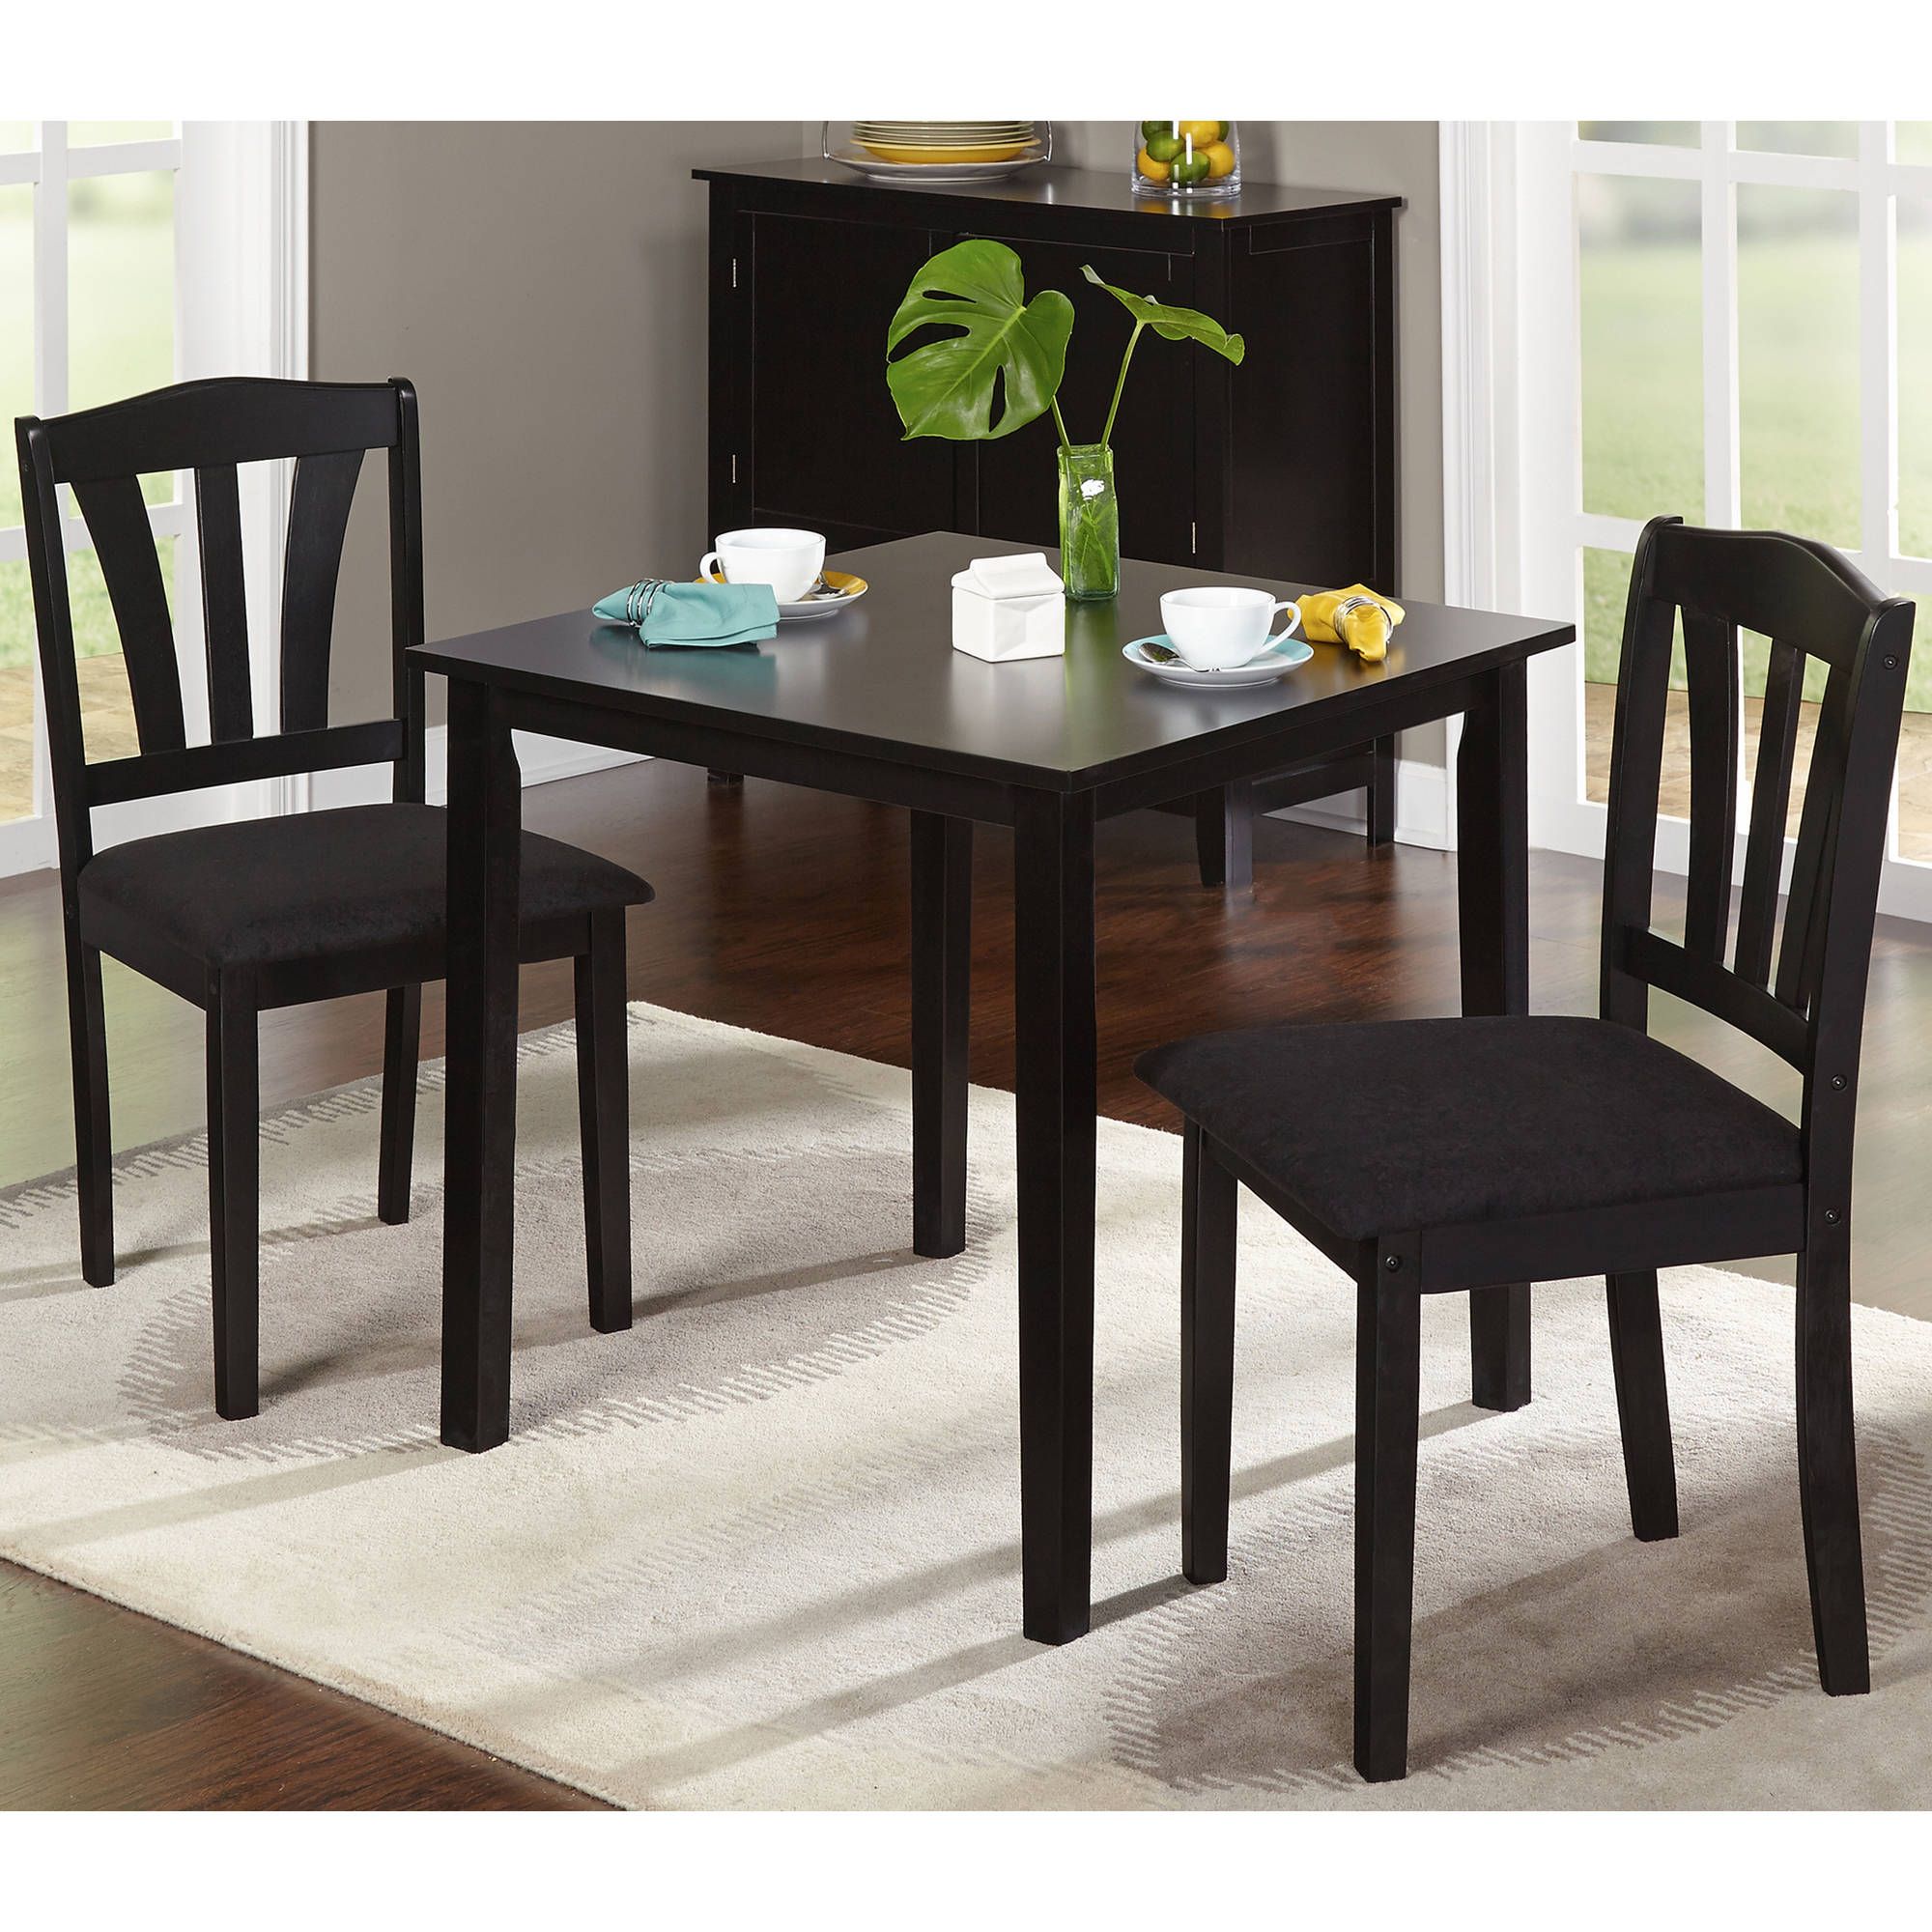 Metropolitan 3 Piece Dining Set, Multiple Finishes Regarding Most Up To Date 3 Piece Dining Sets (Photo 1 of 20)